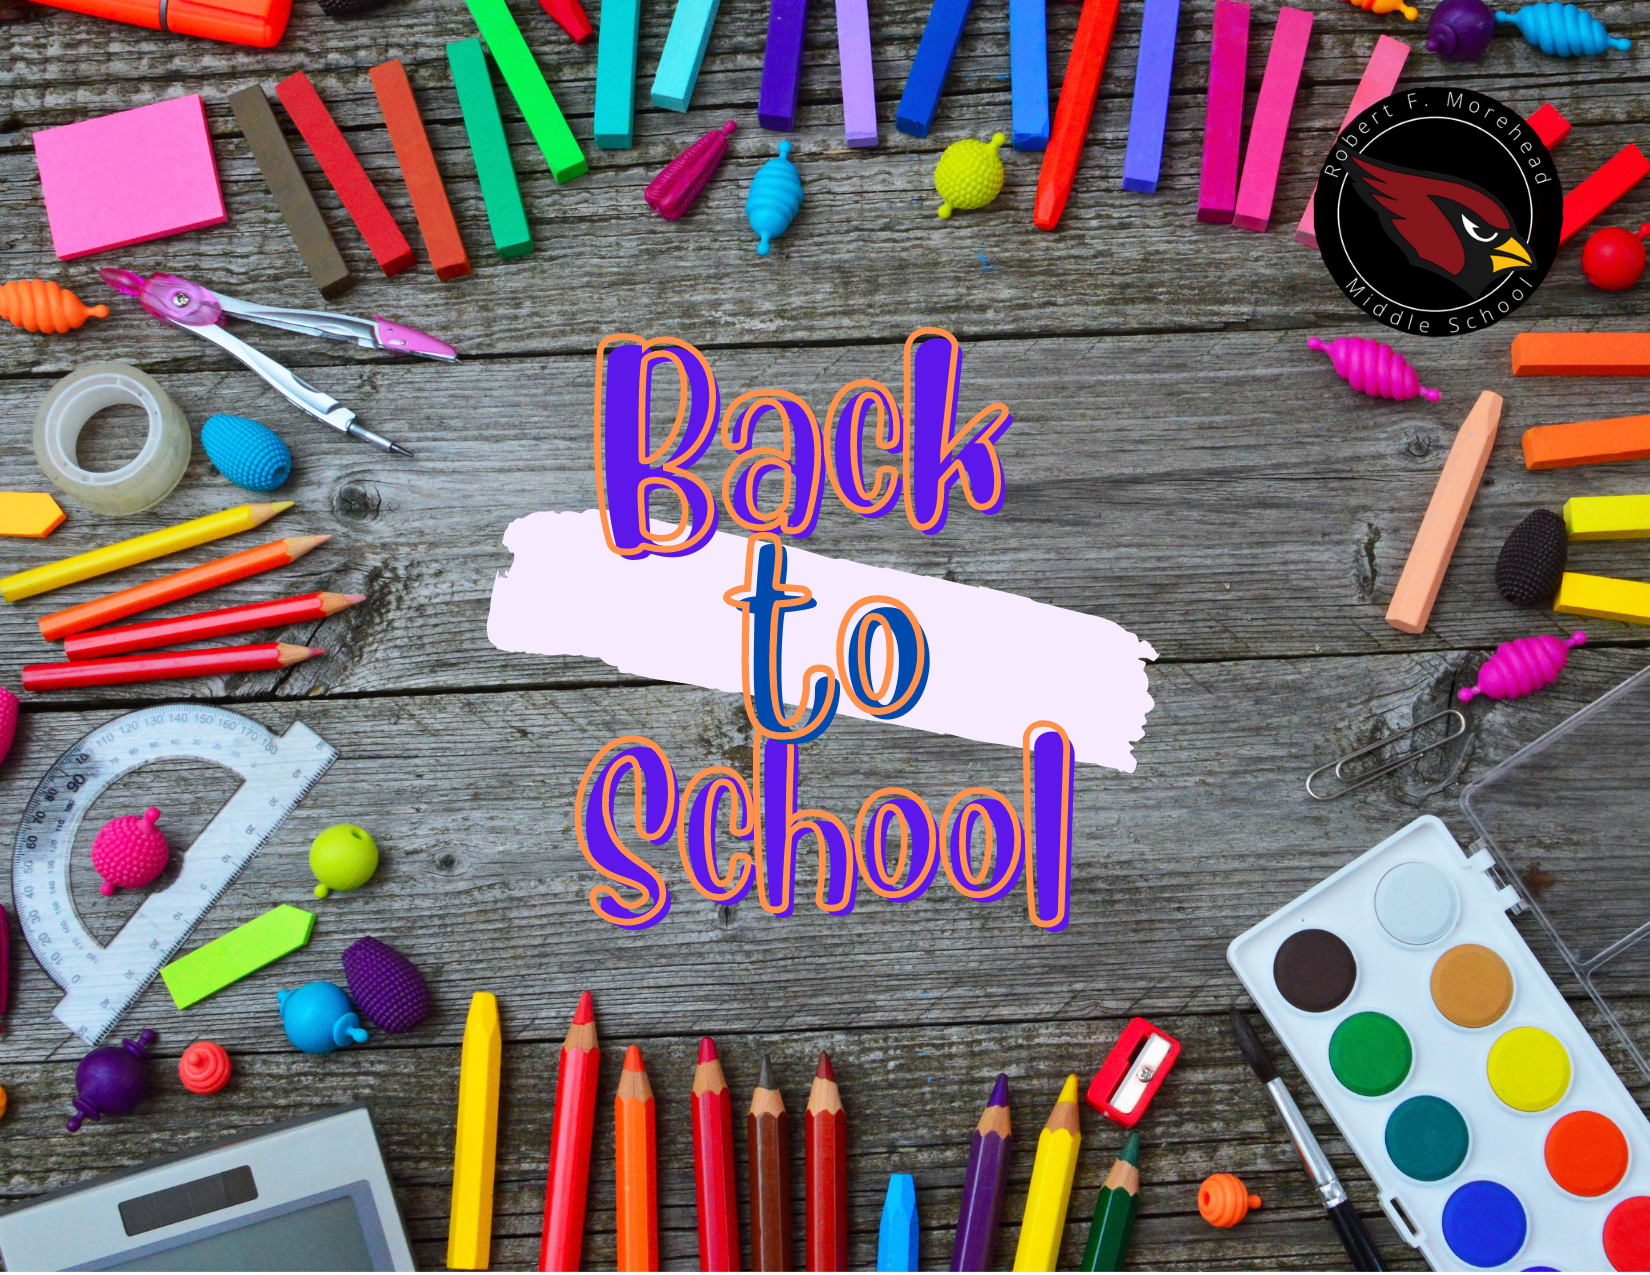 Back to School 22-23